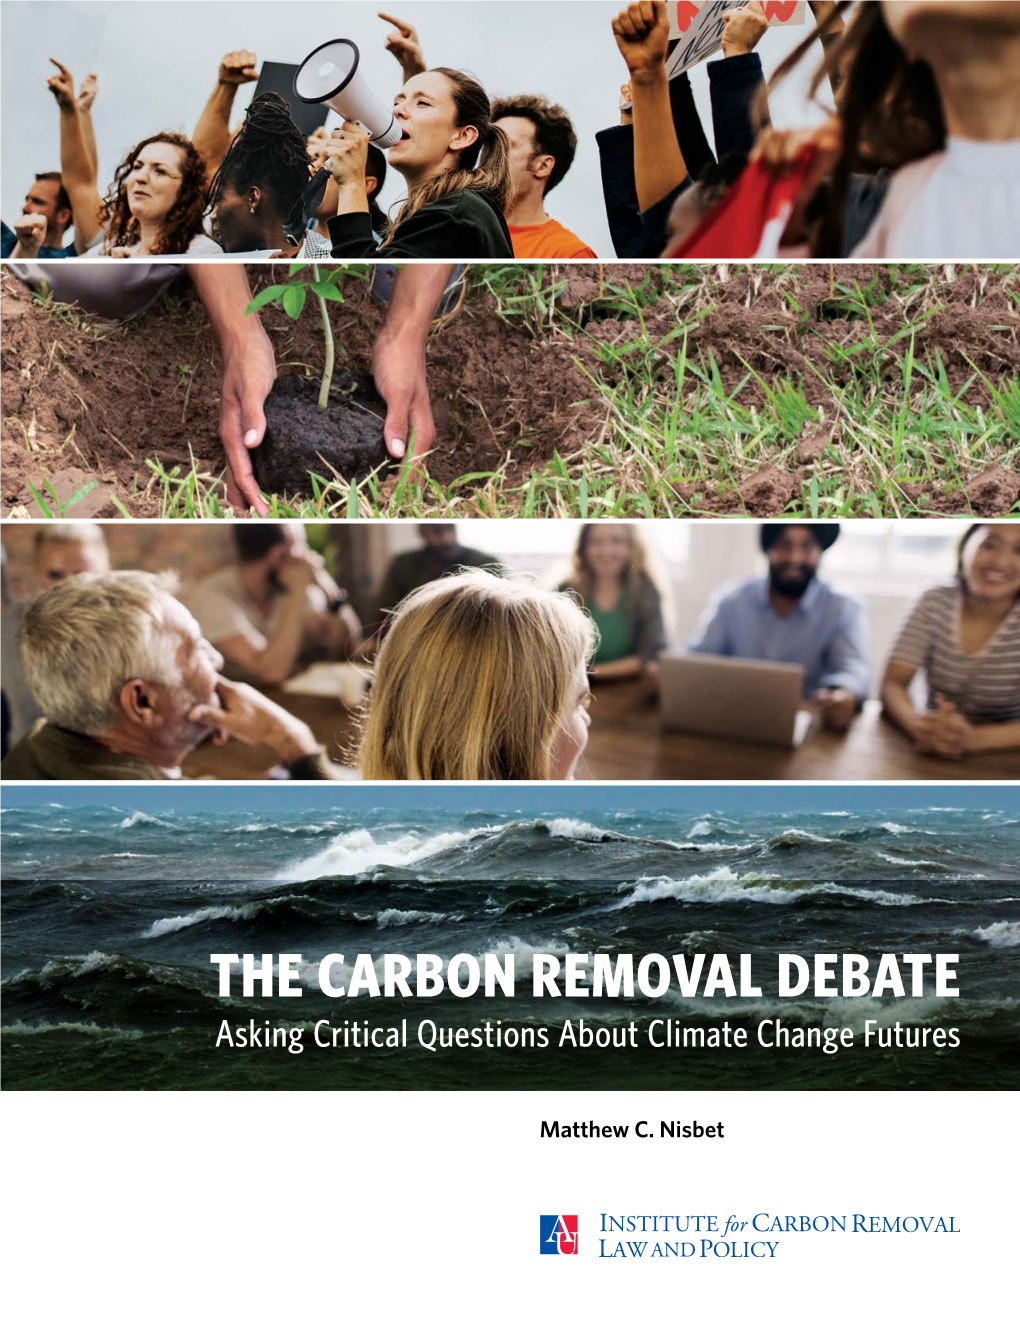 The Carbon Removal Debate: Asking Critical Questions About Climate